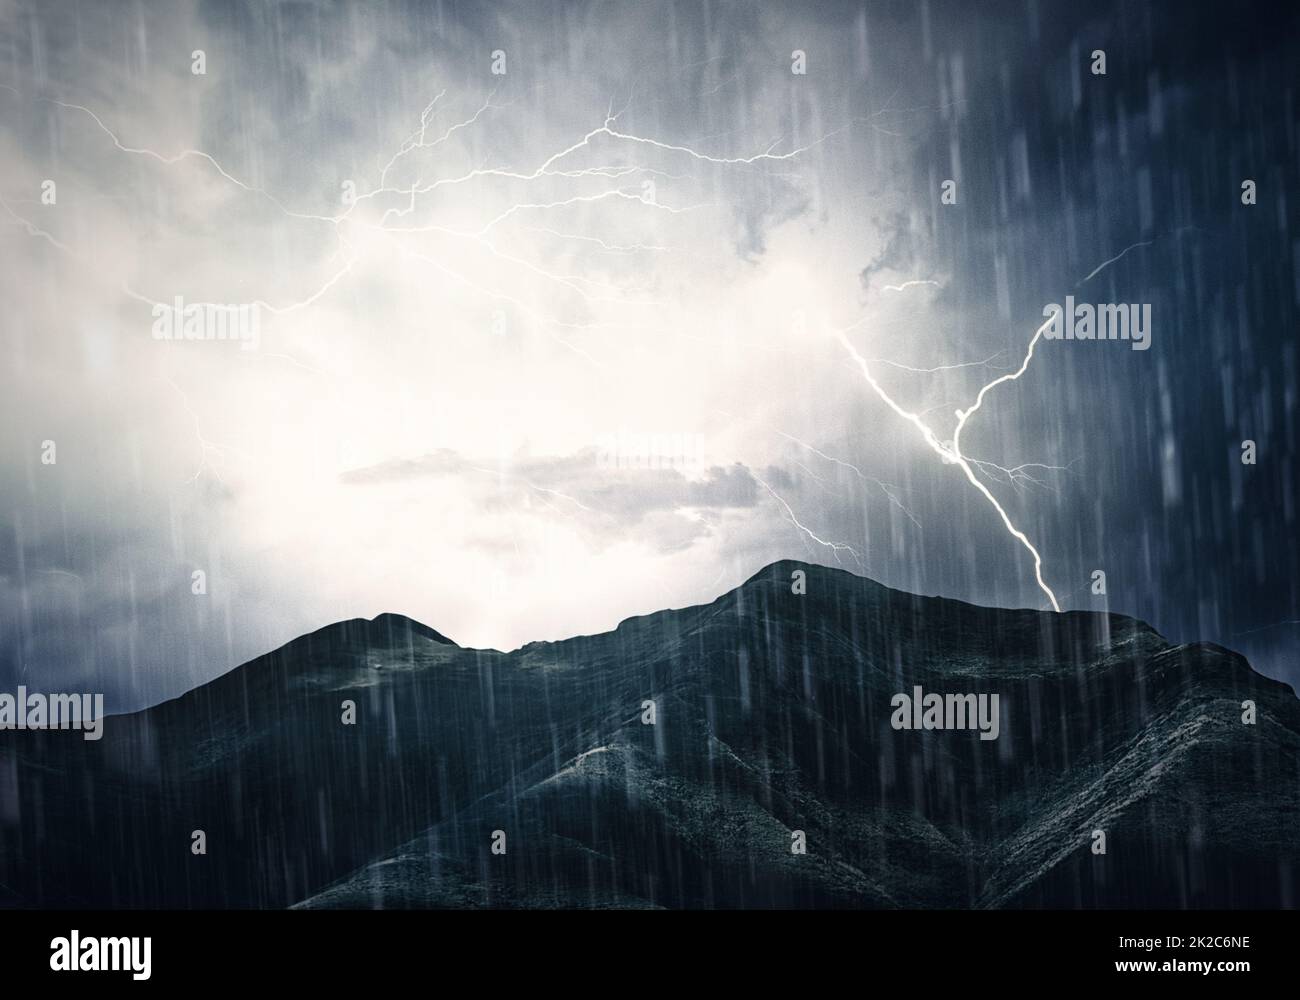 Natures fury. Illustration of a landscape under a torrential storm. Stock Photo